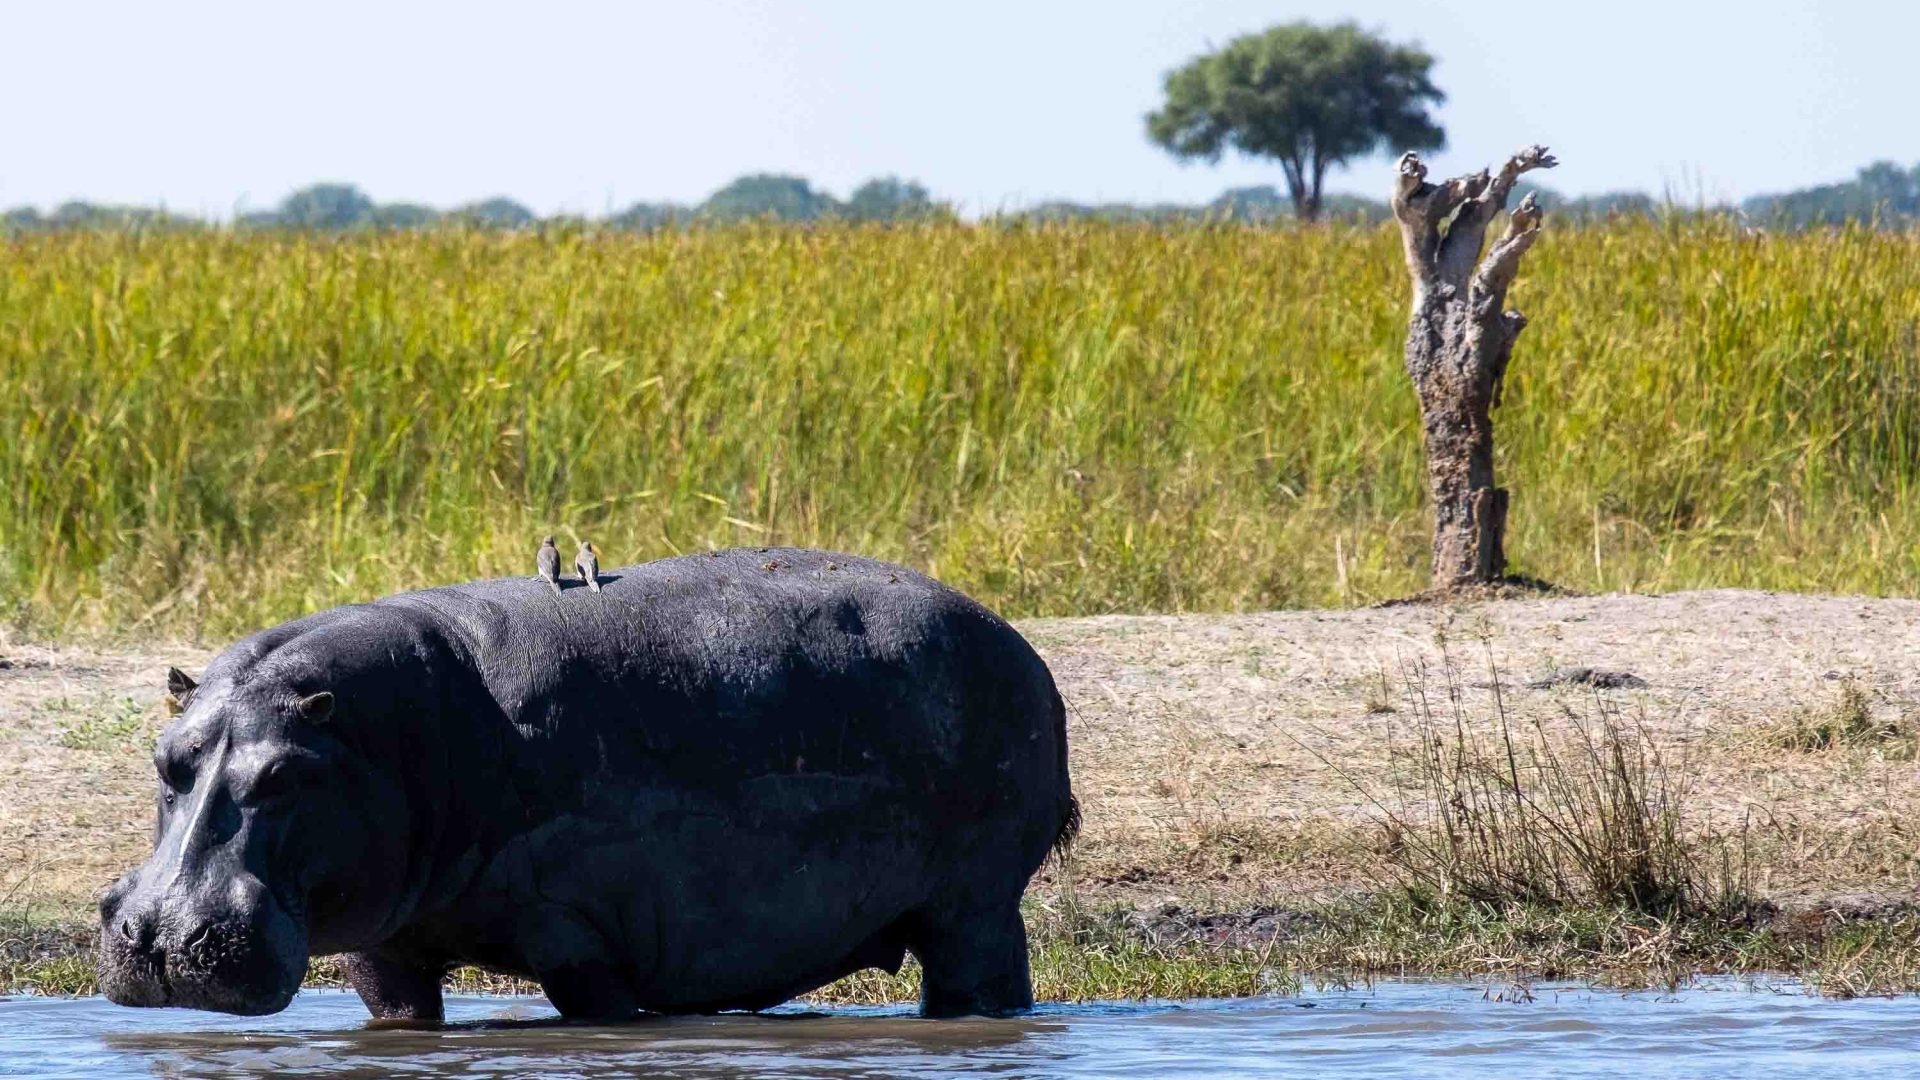 A dark hippo enters the water.